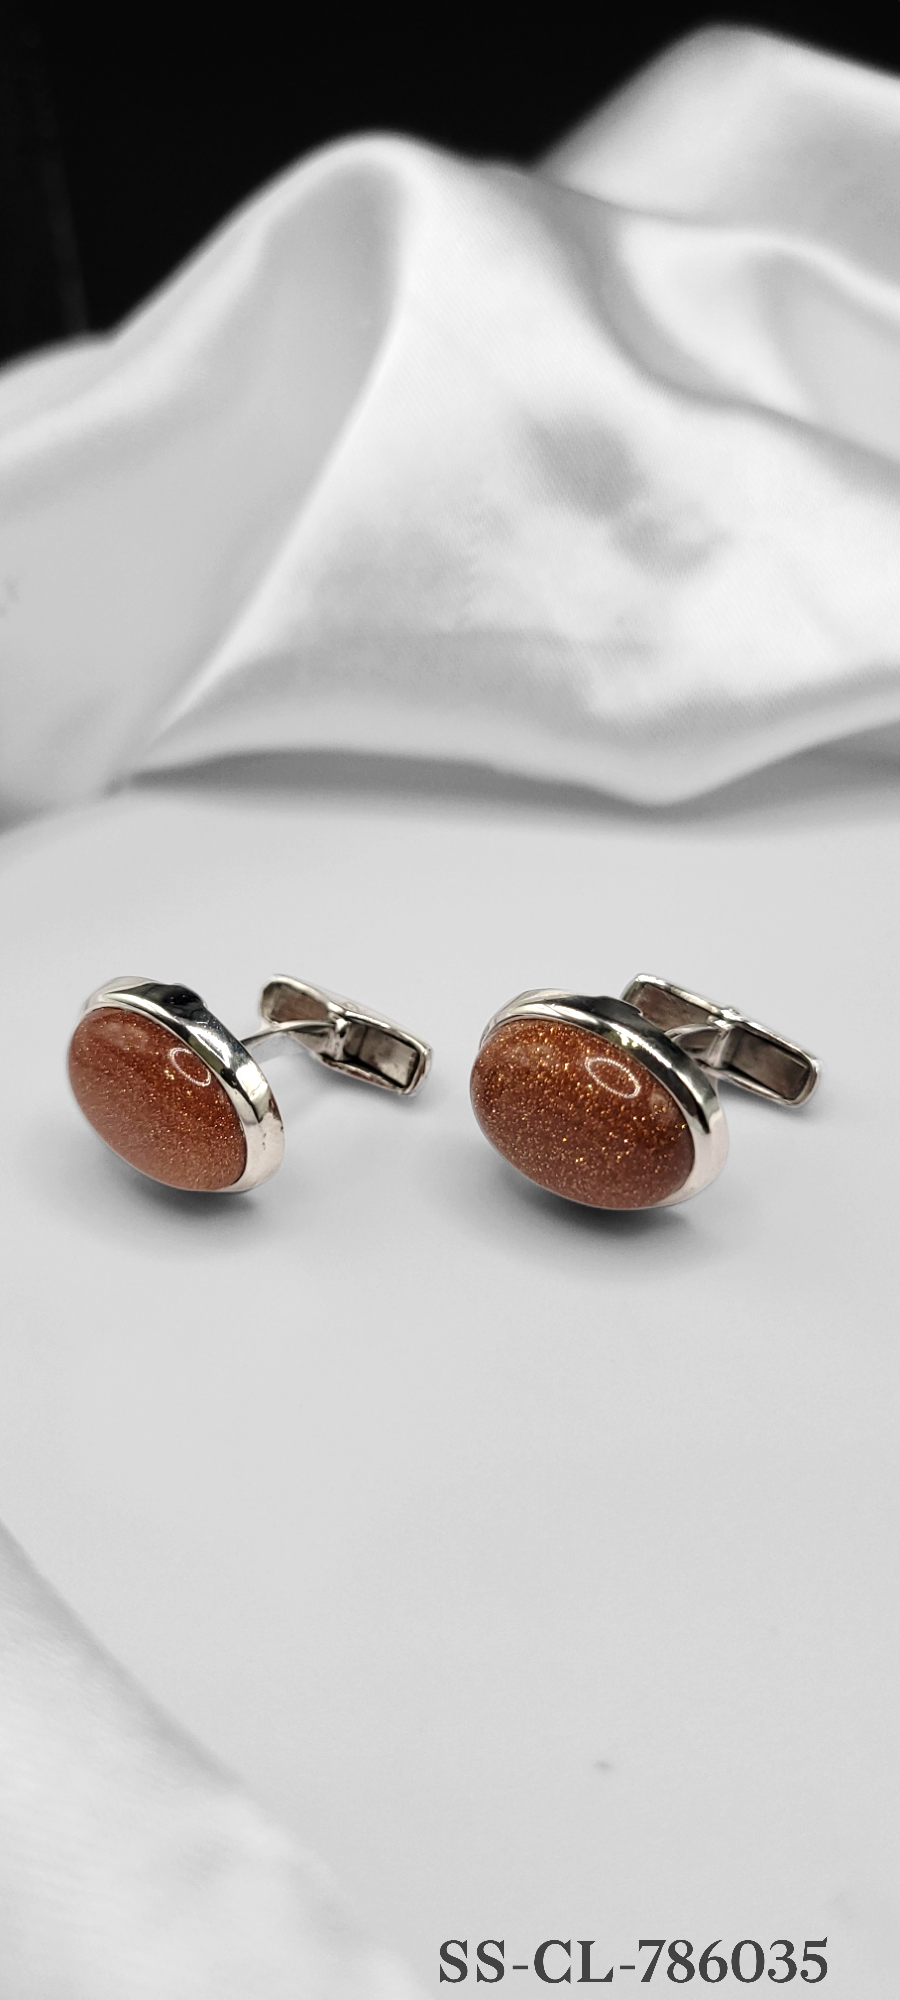 SANDSTONE CUFF LINKS ON STERLING SILVER. BEST KNOWN AS A STONE THAT RESEMBLES THE GALAXY! ONE OF A KIND PIECE